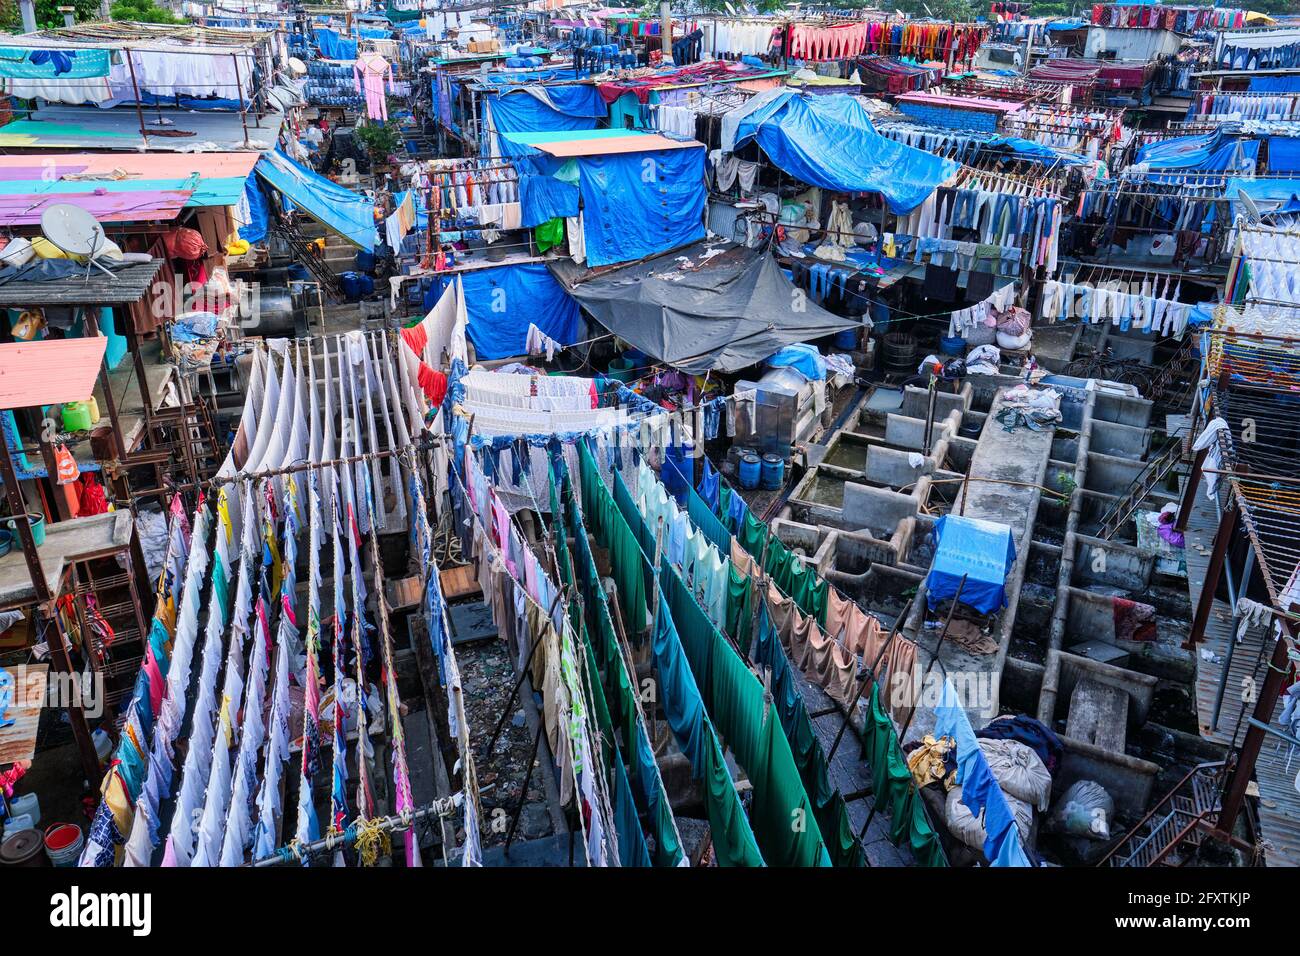 Dhobi Ghat is an open air laundromat lavoir in Mumbai, India with laundry drying on ropes Stock Photo